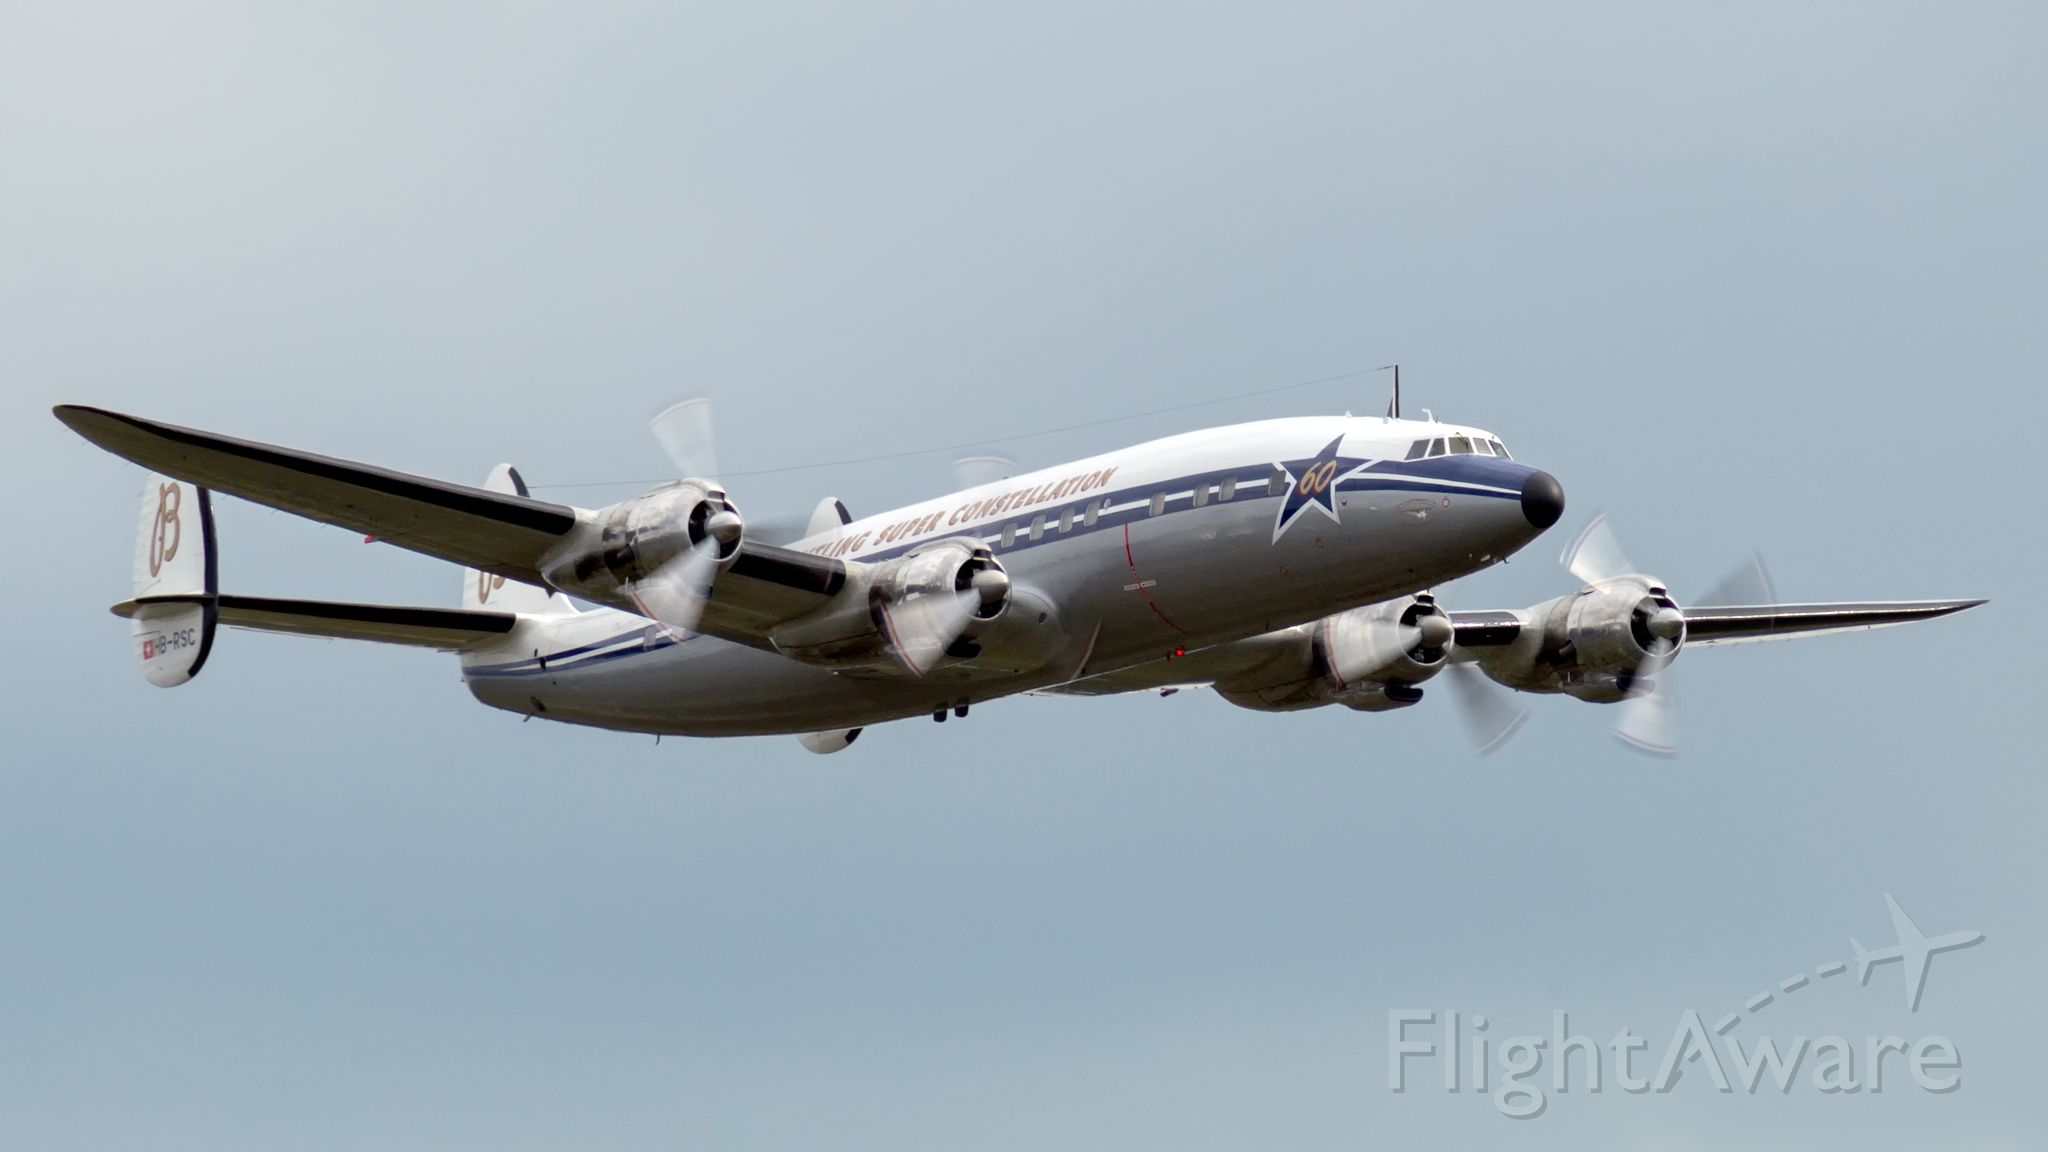 Lockheed EC-121 Constellation (HB-RSC) - Sanicole Airshow , Belgium. September 2015. On picture , Lockheed C-121C Super Constellation. It`s not fying anymore ... I`ve a luck to see this Beauty in the air.